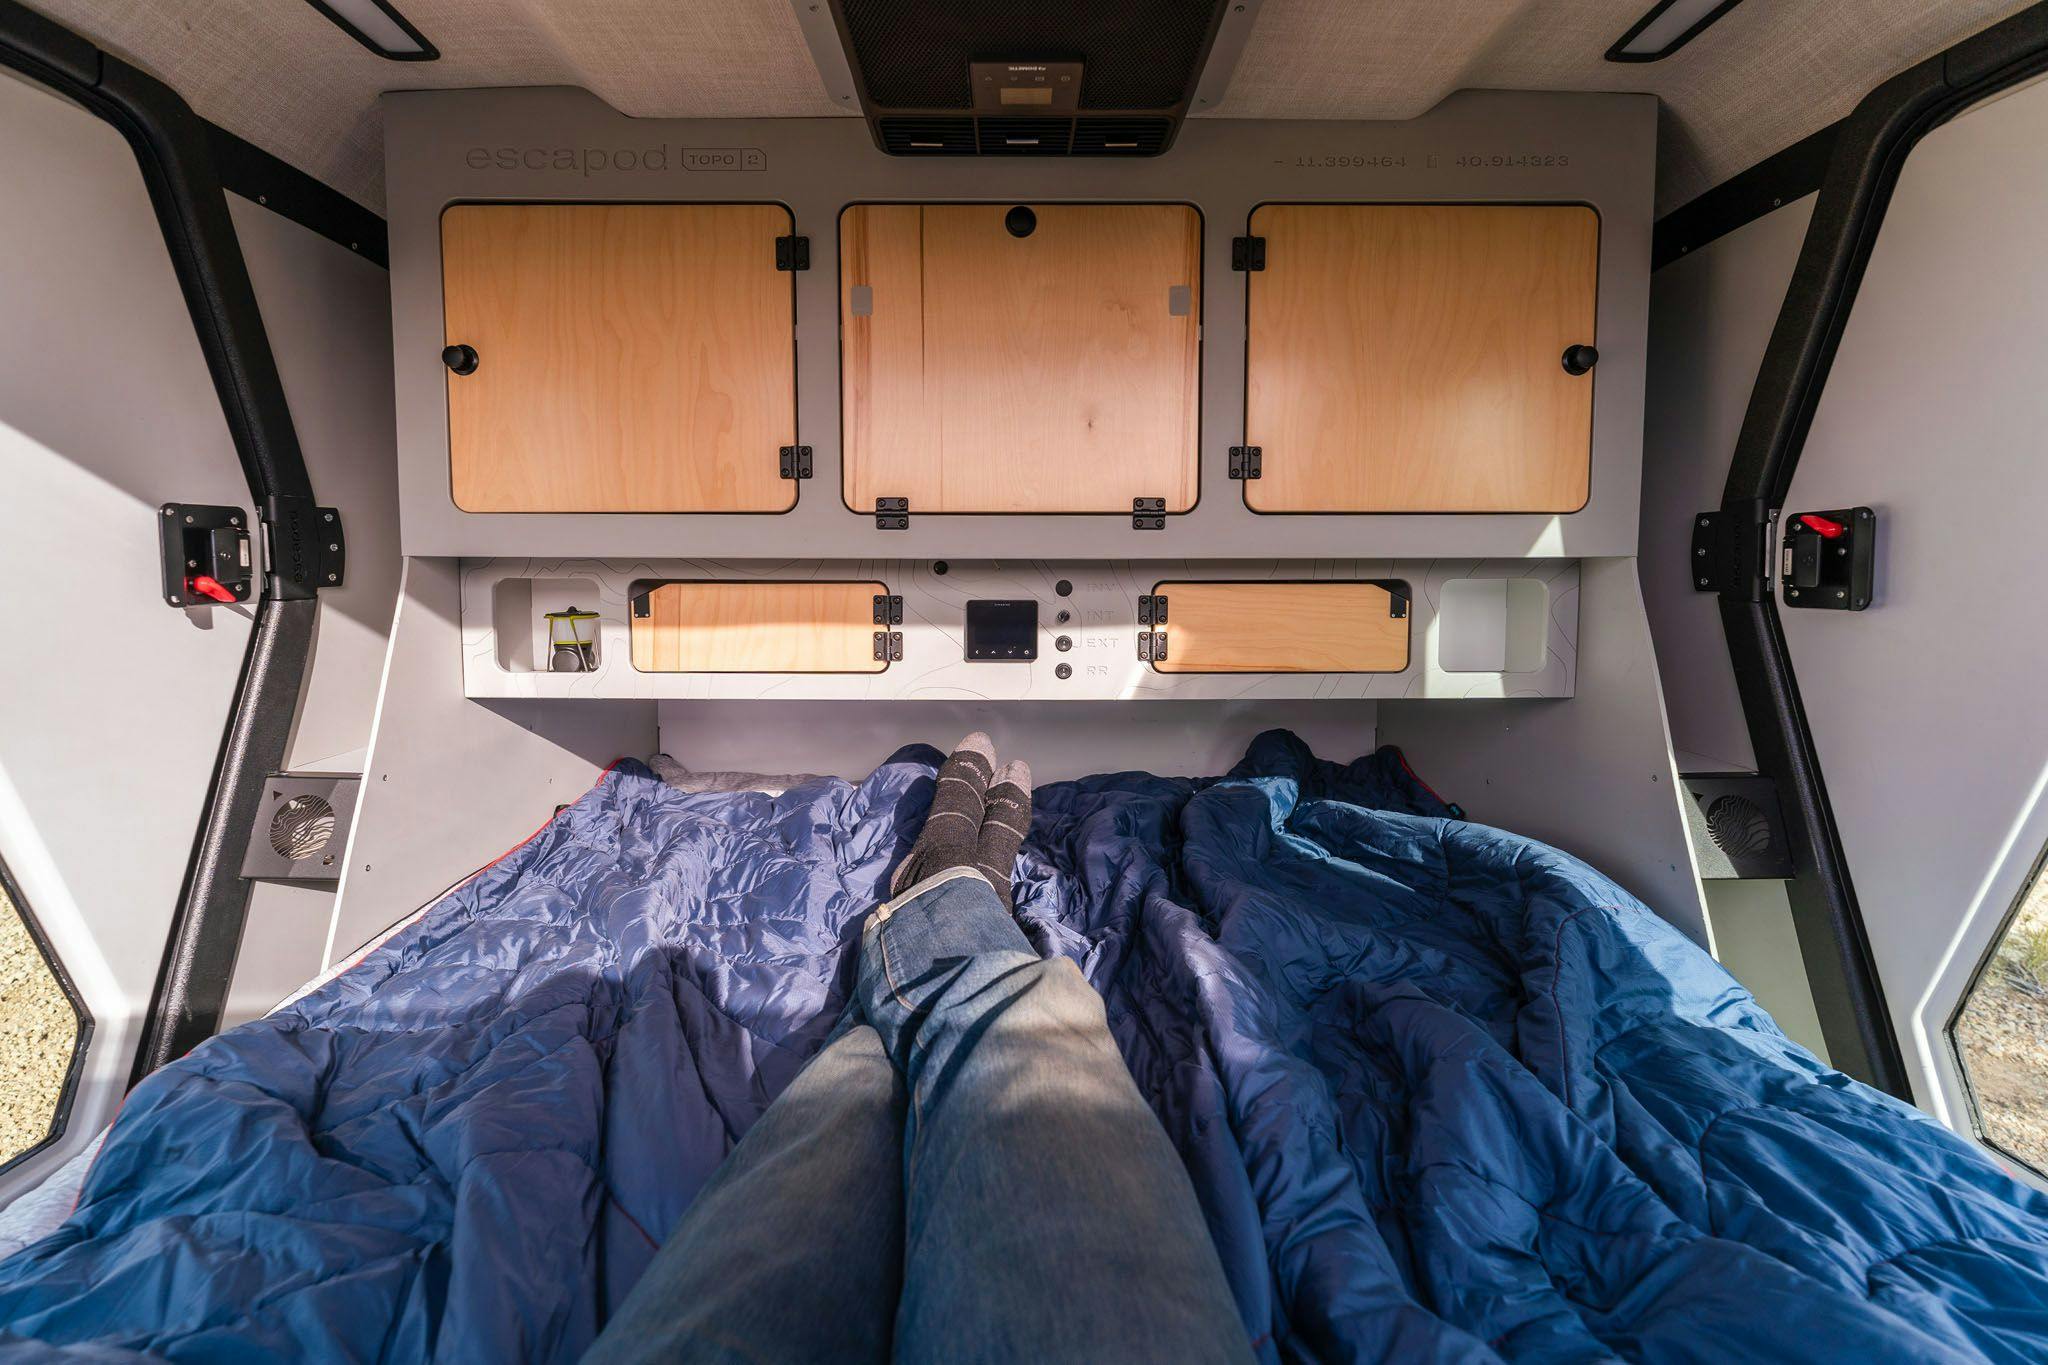 A man is lounging in the spacious cabin of the TOPO2 teardrop camper with his legs extended and crossed at the ankles.